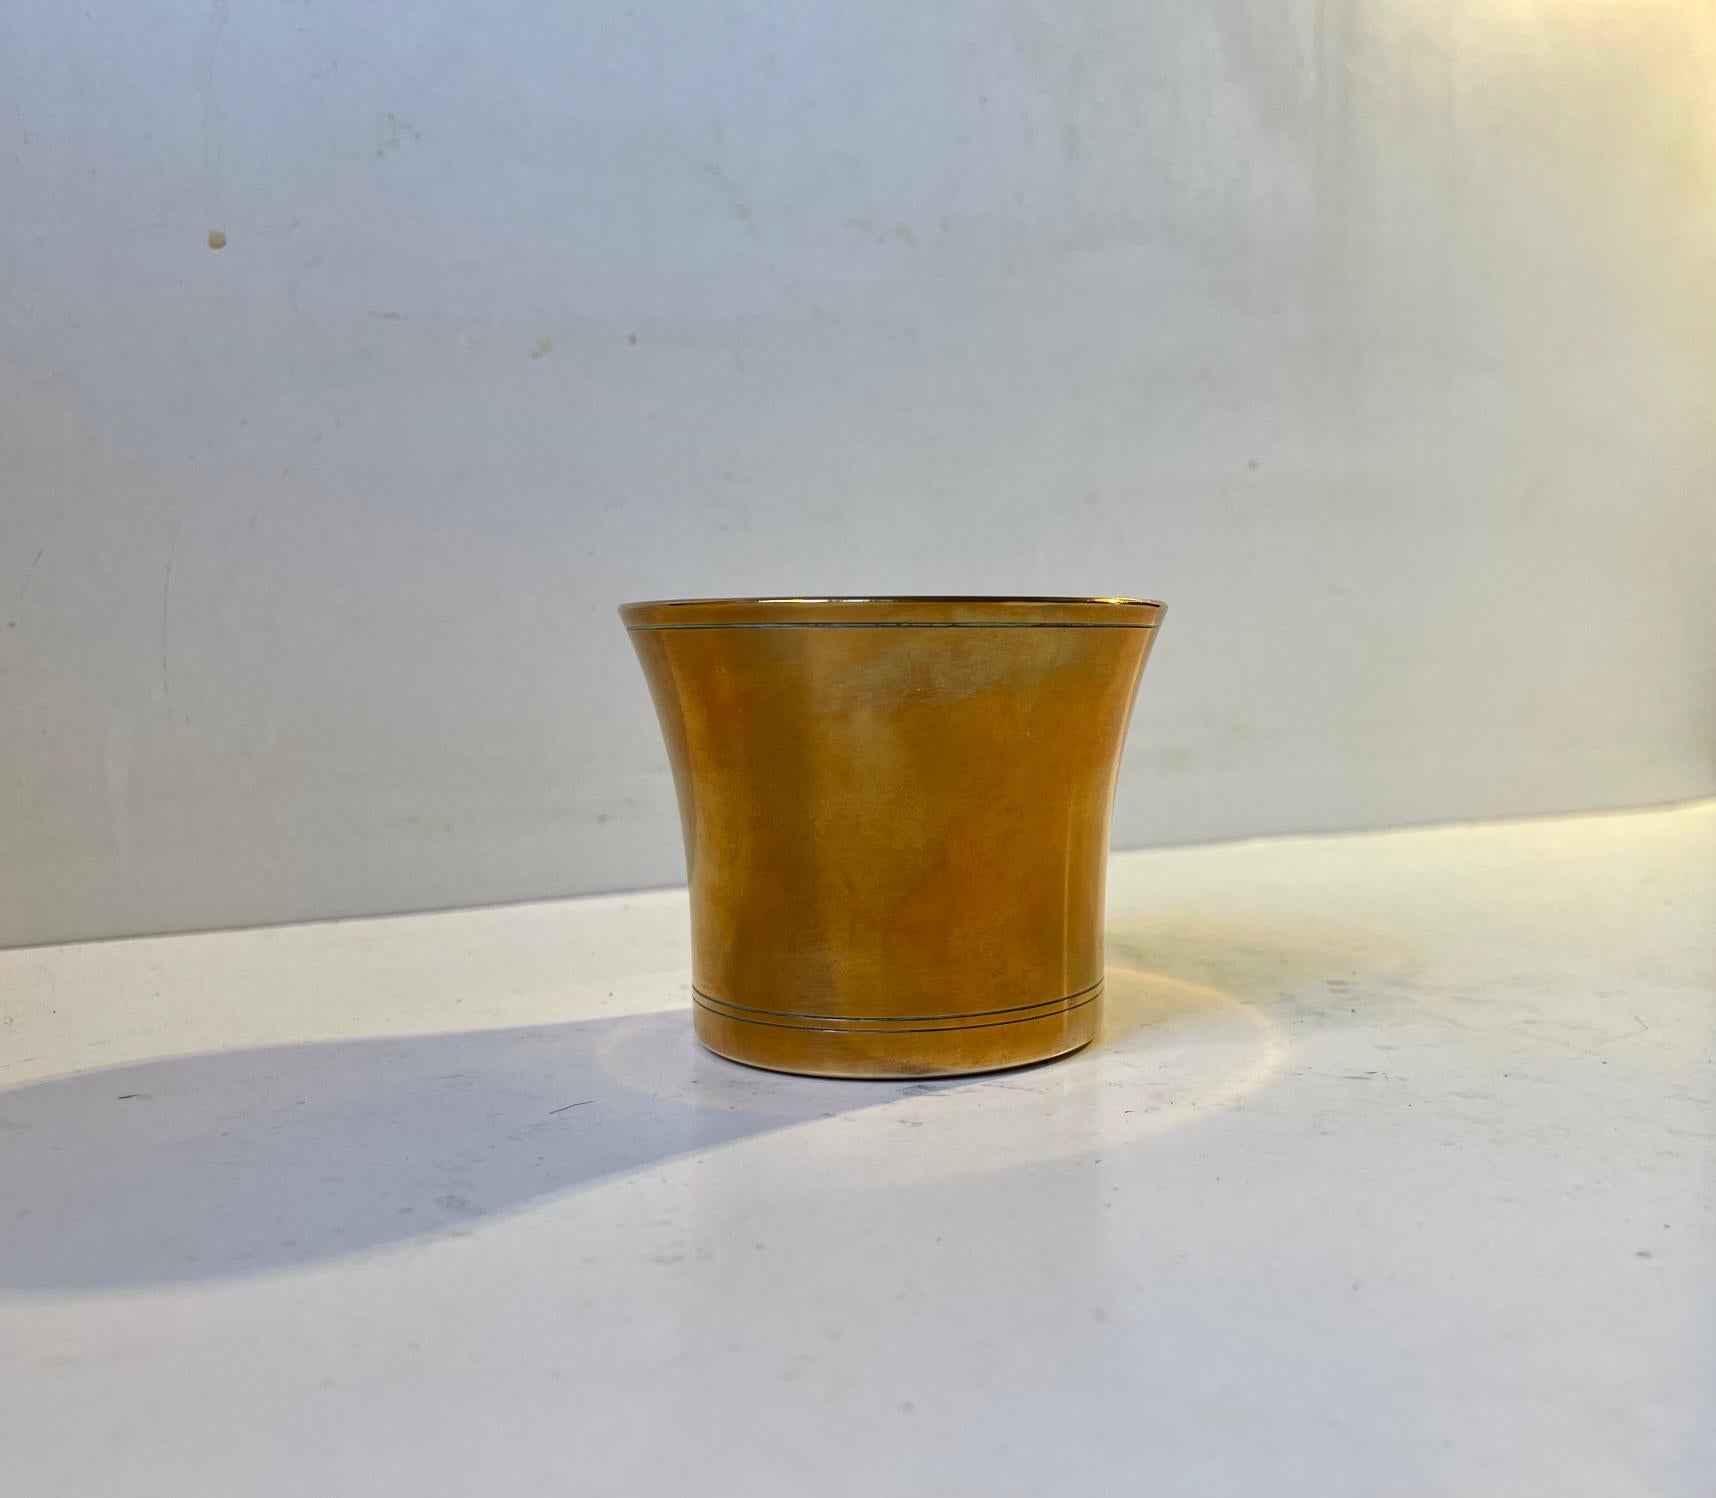 Small patinated vase in bronze designed by Just Andersen and manufactured in Denmark during the 1930s. Fully signed and numbered to its base. Measurements: H: 7 cm, D: 9 cm.